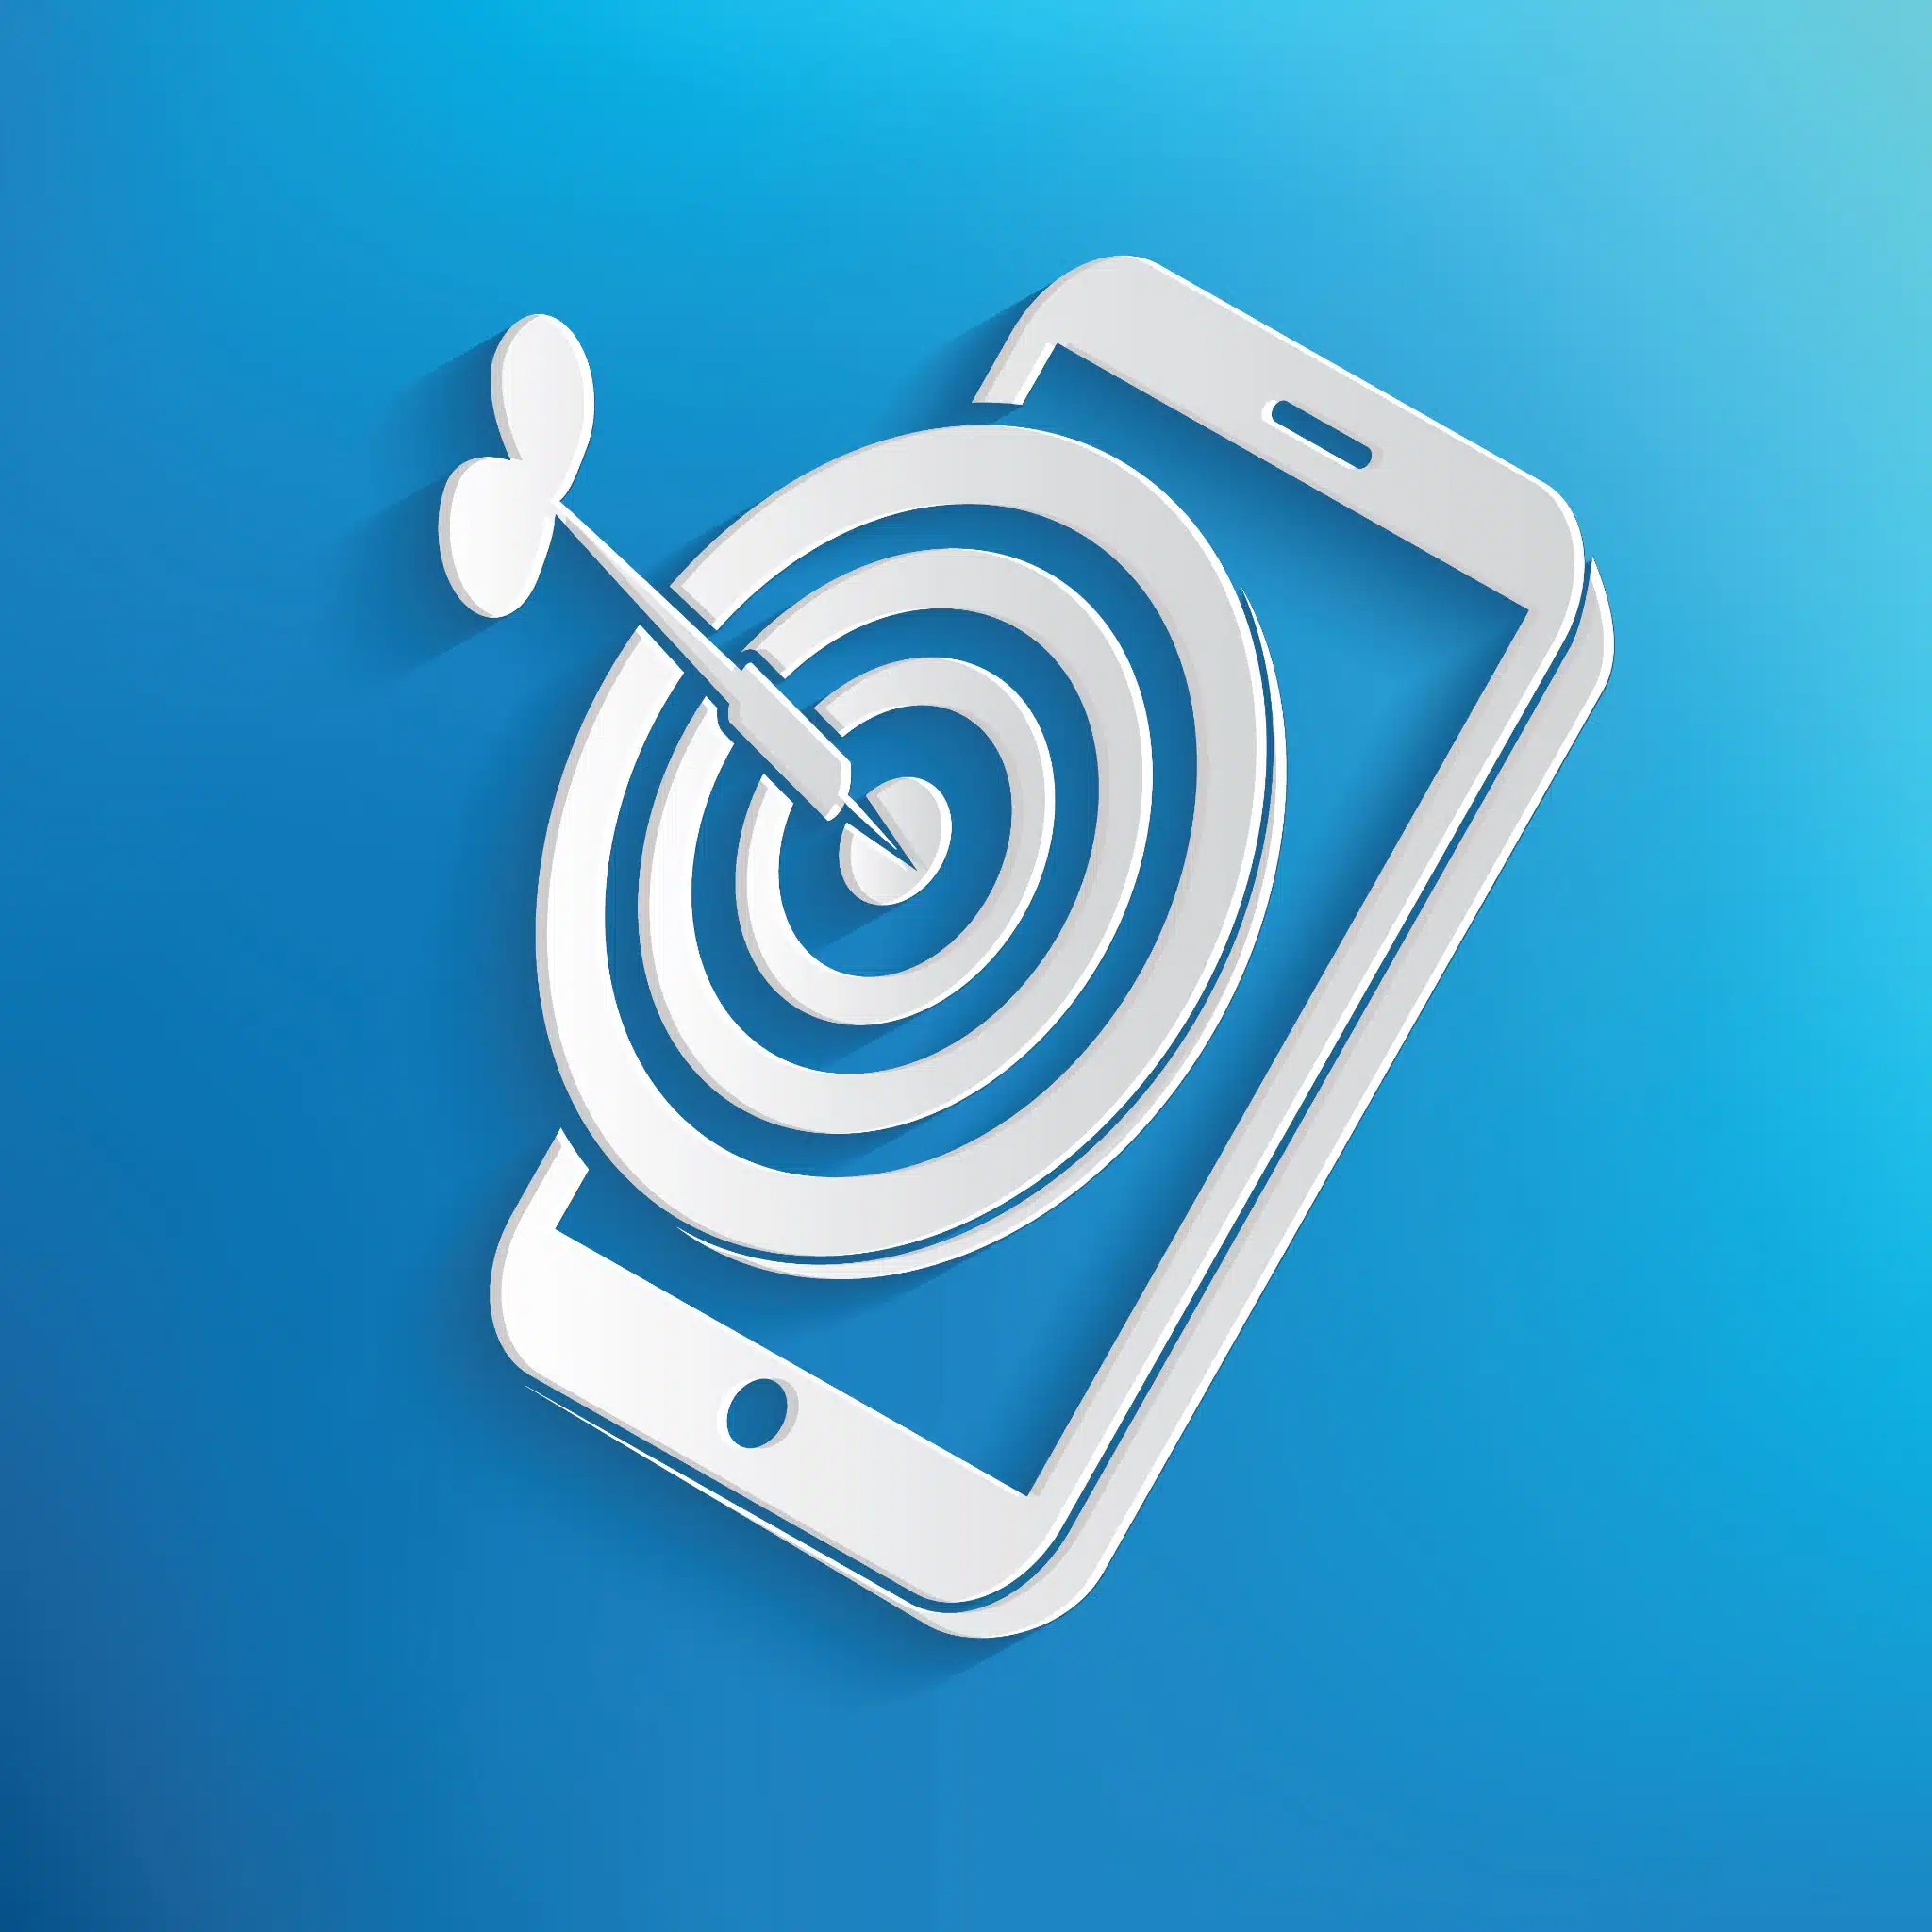 Mobile marketing symbol on blue background,clean vector